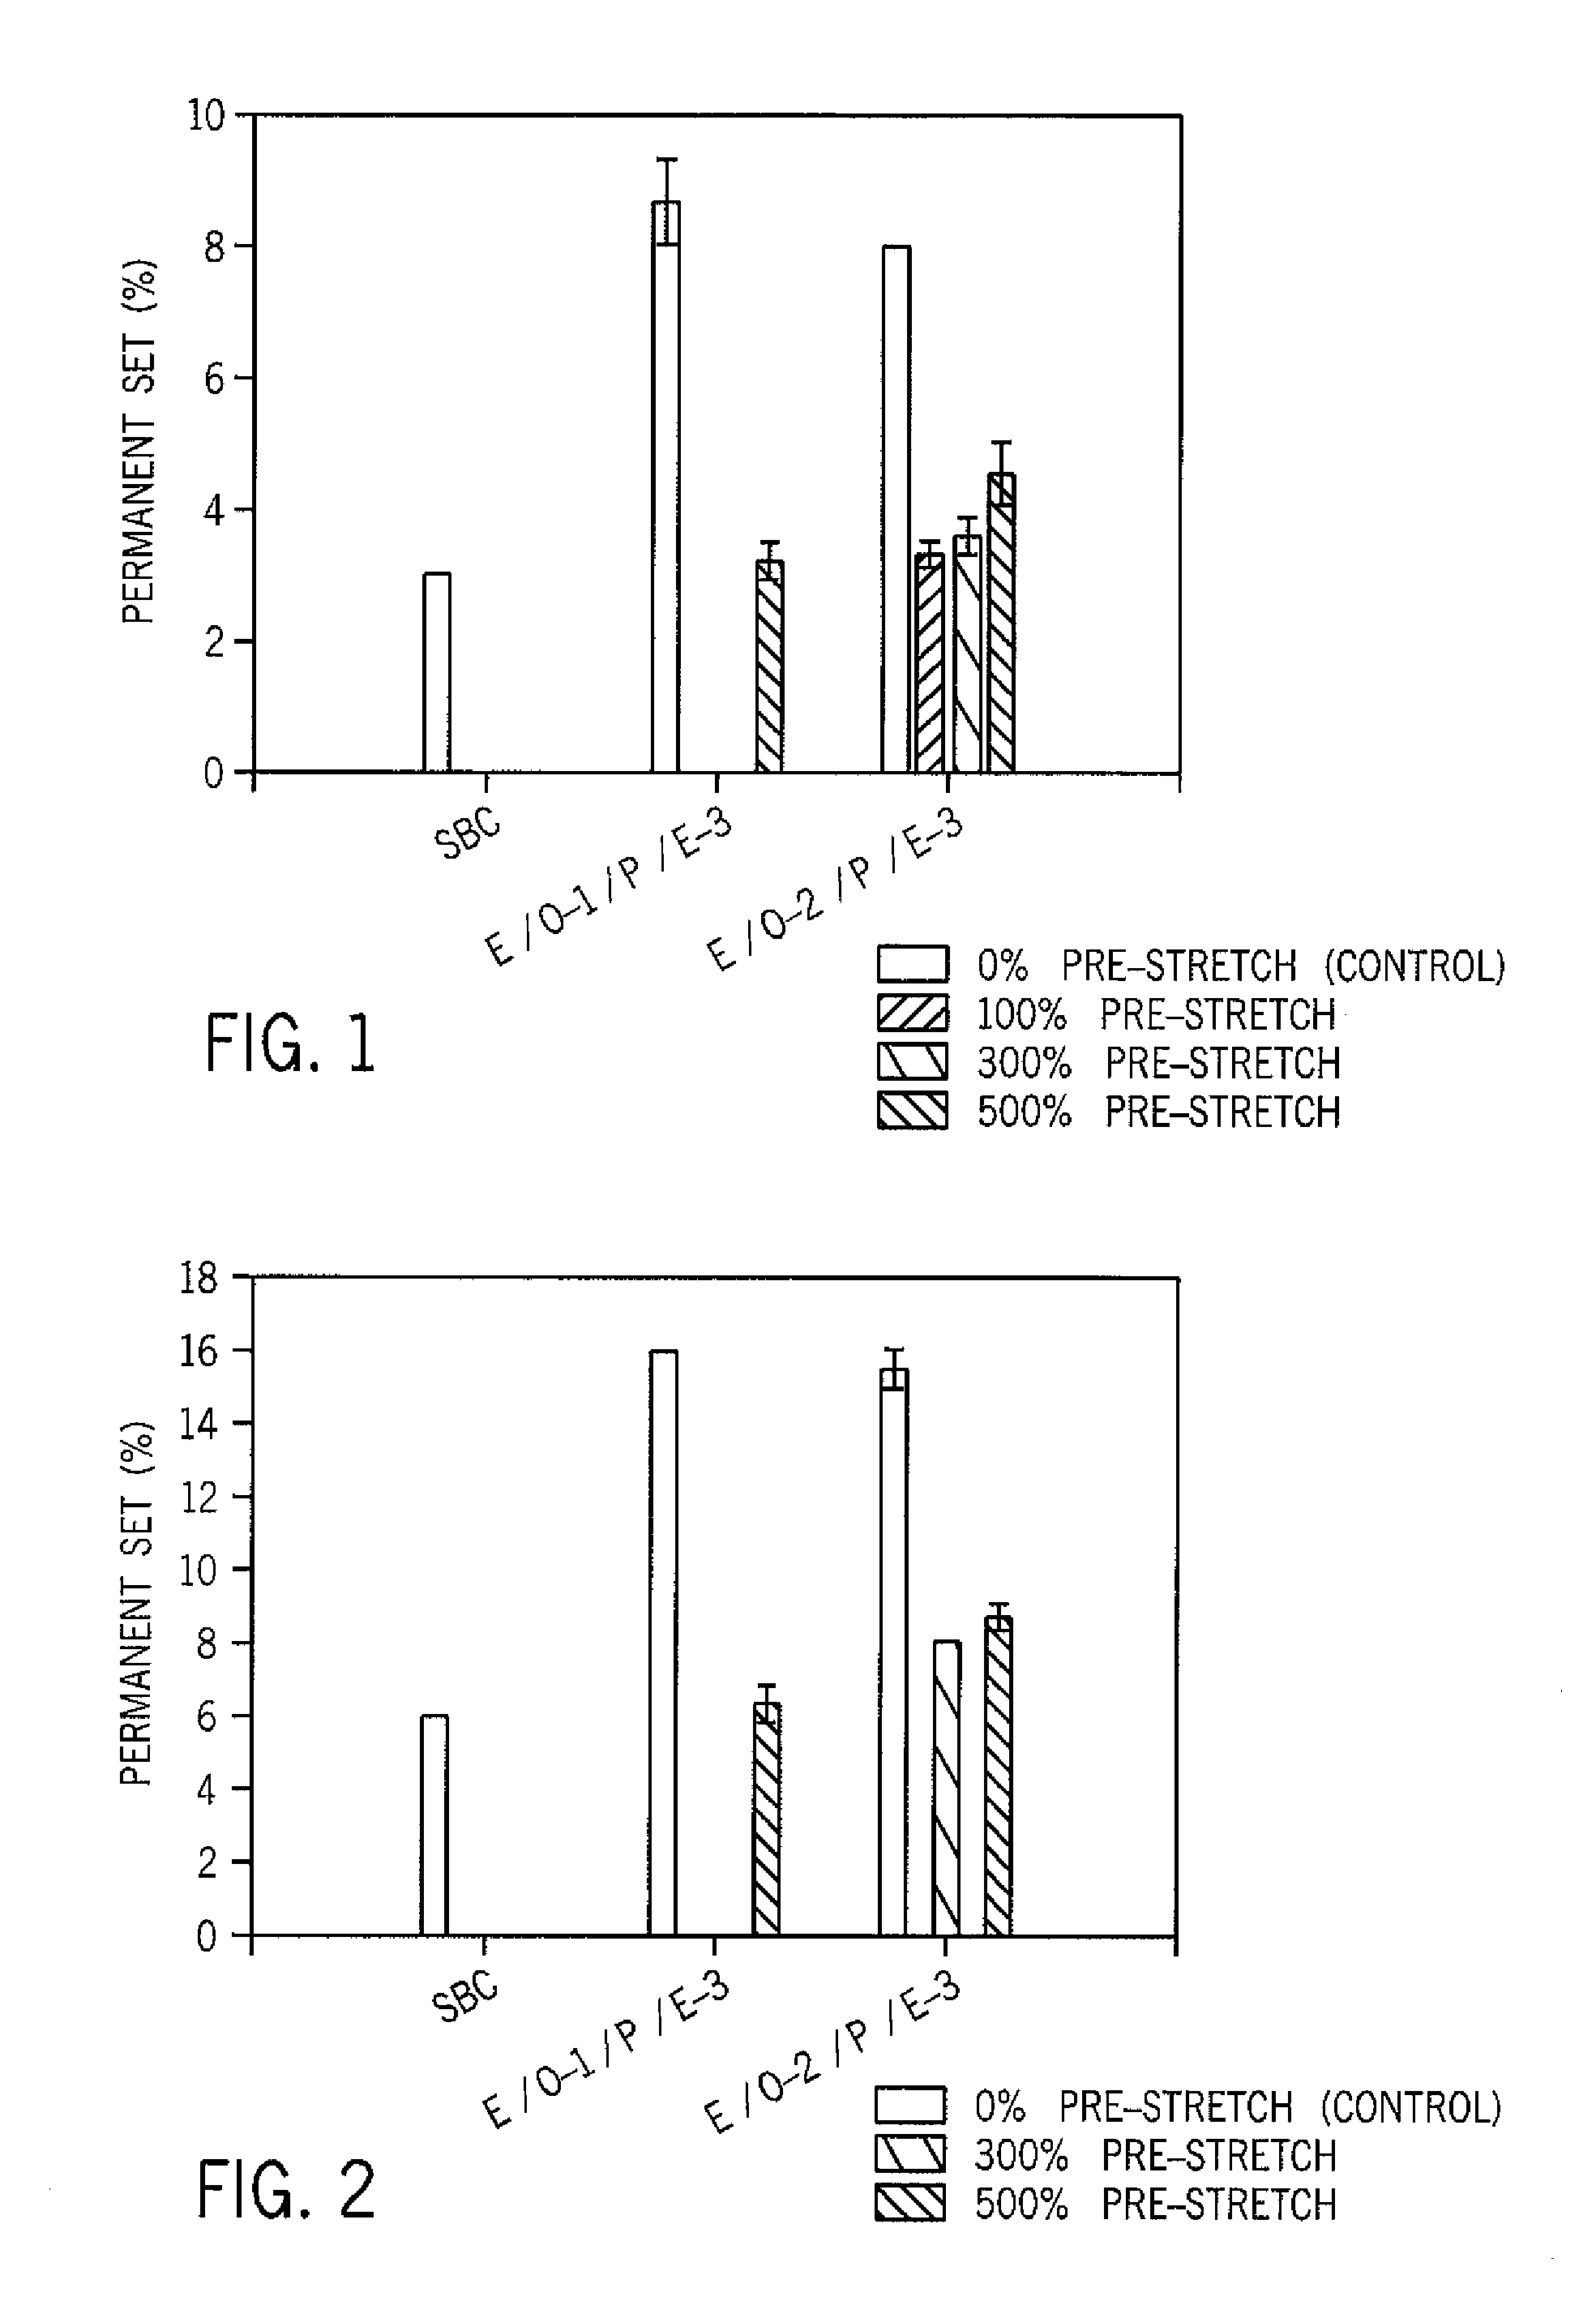 Multi-Layer, Pre-Stretched Elastic Articles